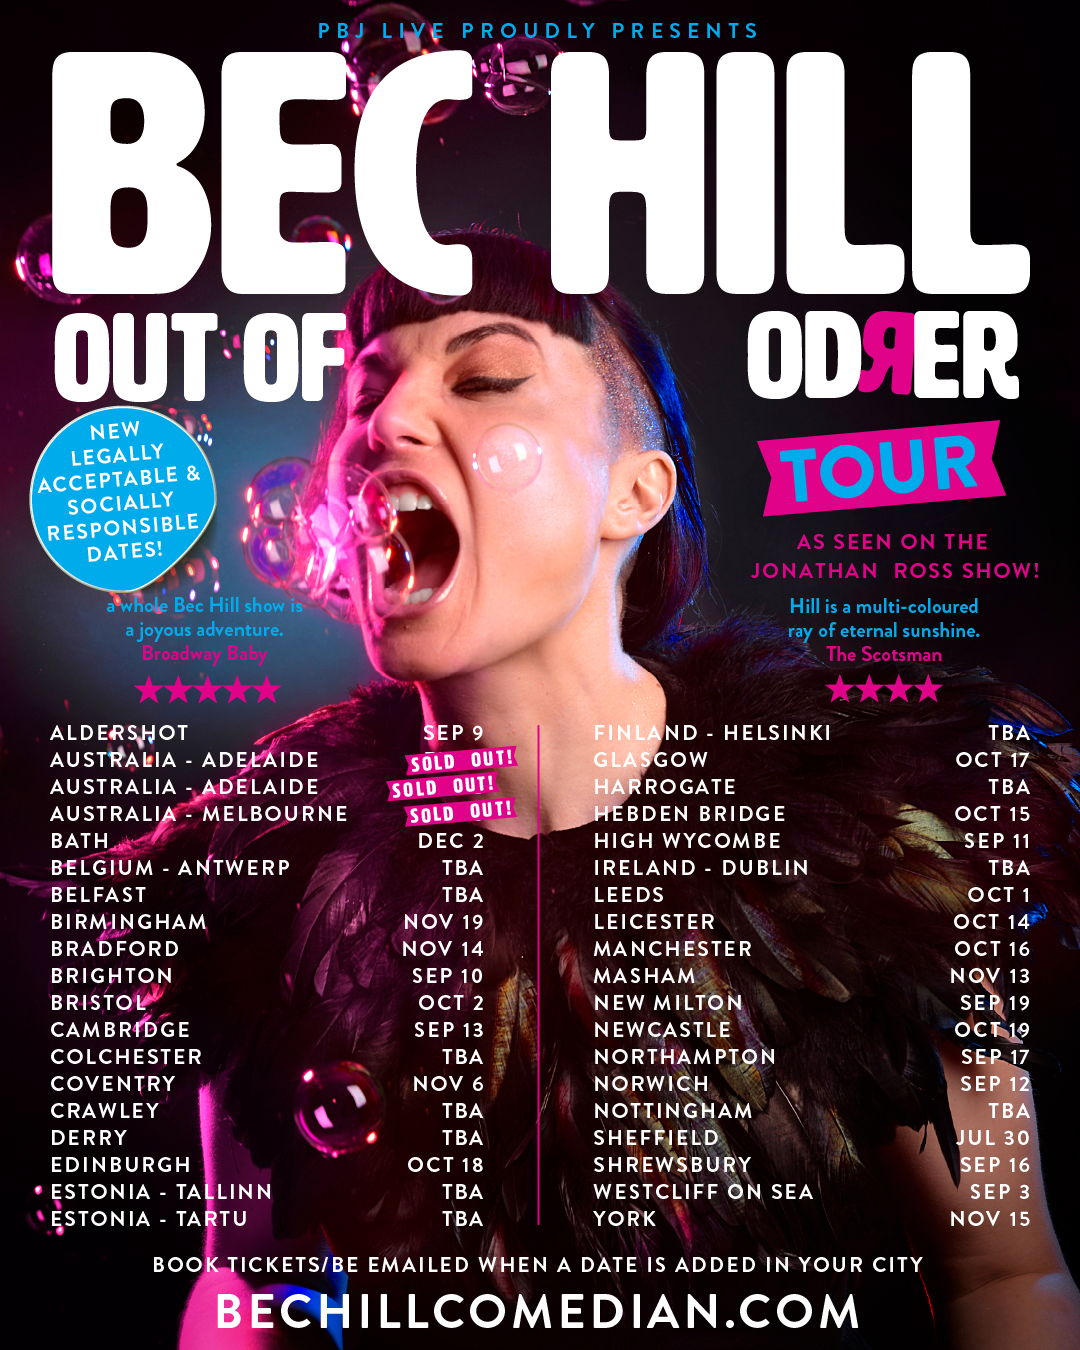 ANNOUNCEMENT: The Rescheduling of Bec Hill's Tour